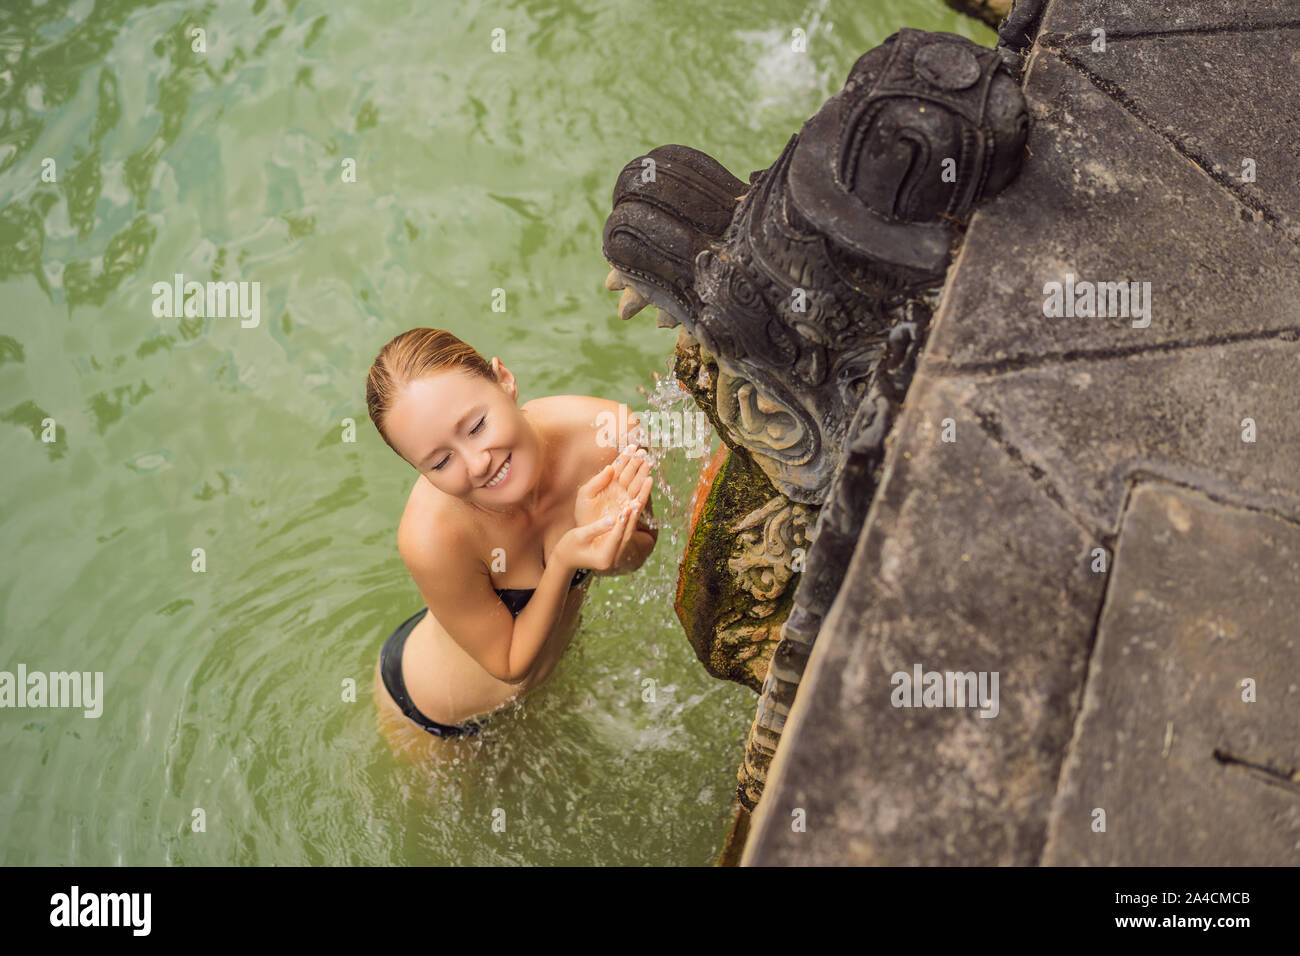 Young woman in hot springs banjar. Thermal water is released from the mouth of statues at a hot springs in Banjar, Bali, Indonesia Stock Photo